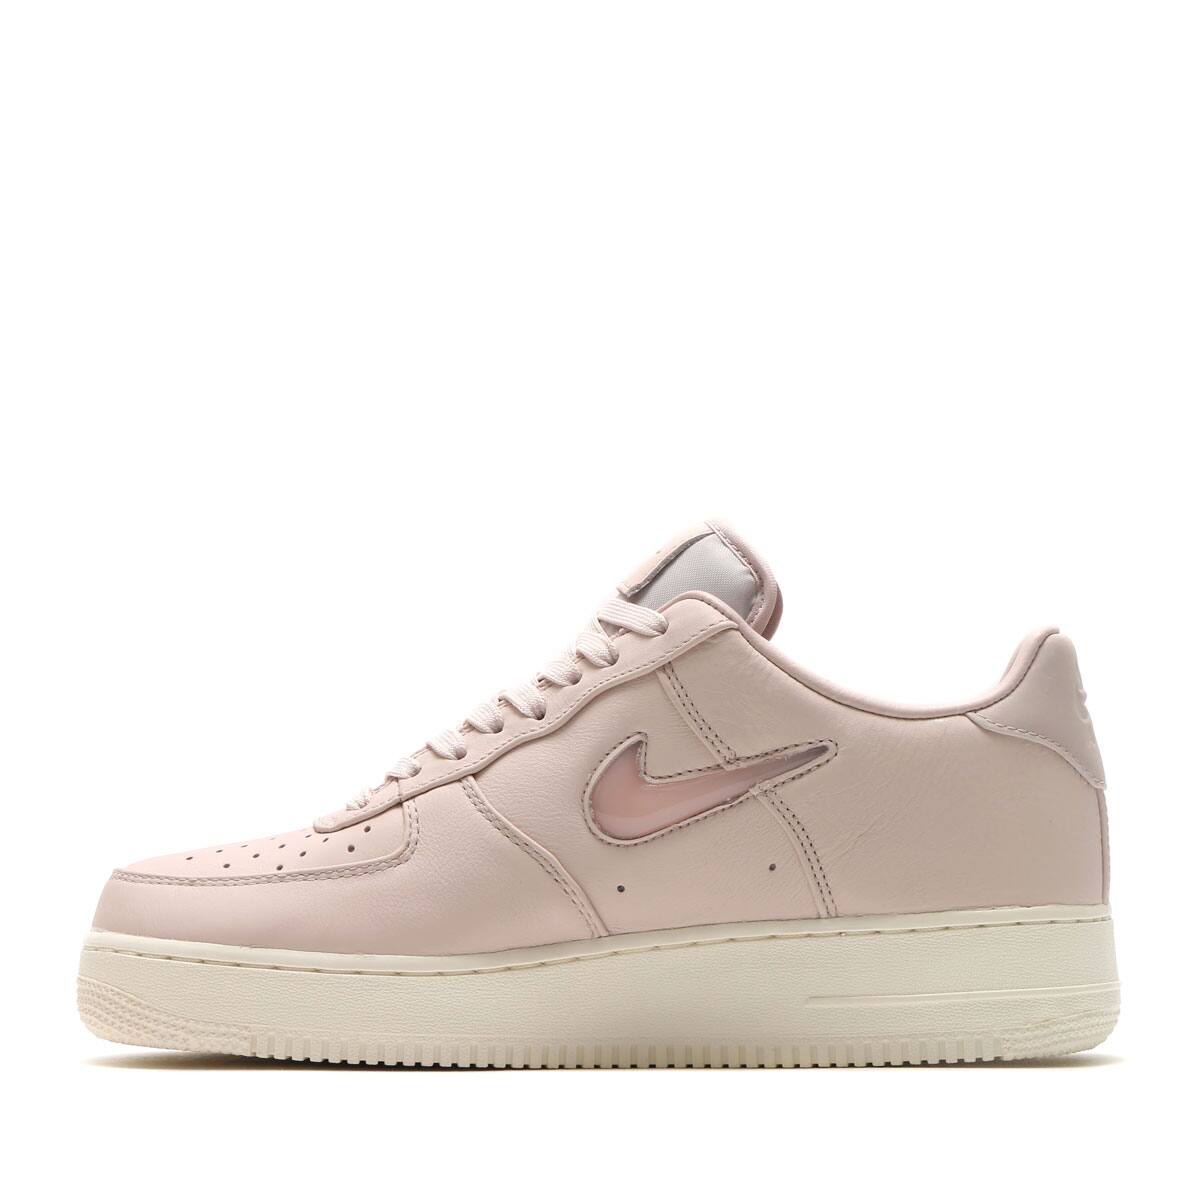 Nike Air Force 1 Retro Prm Jewel Silt Red Sail For Sale 